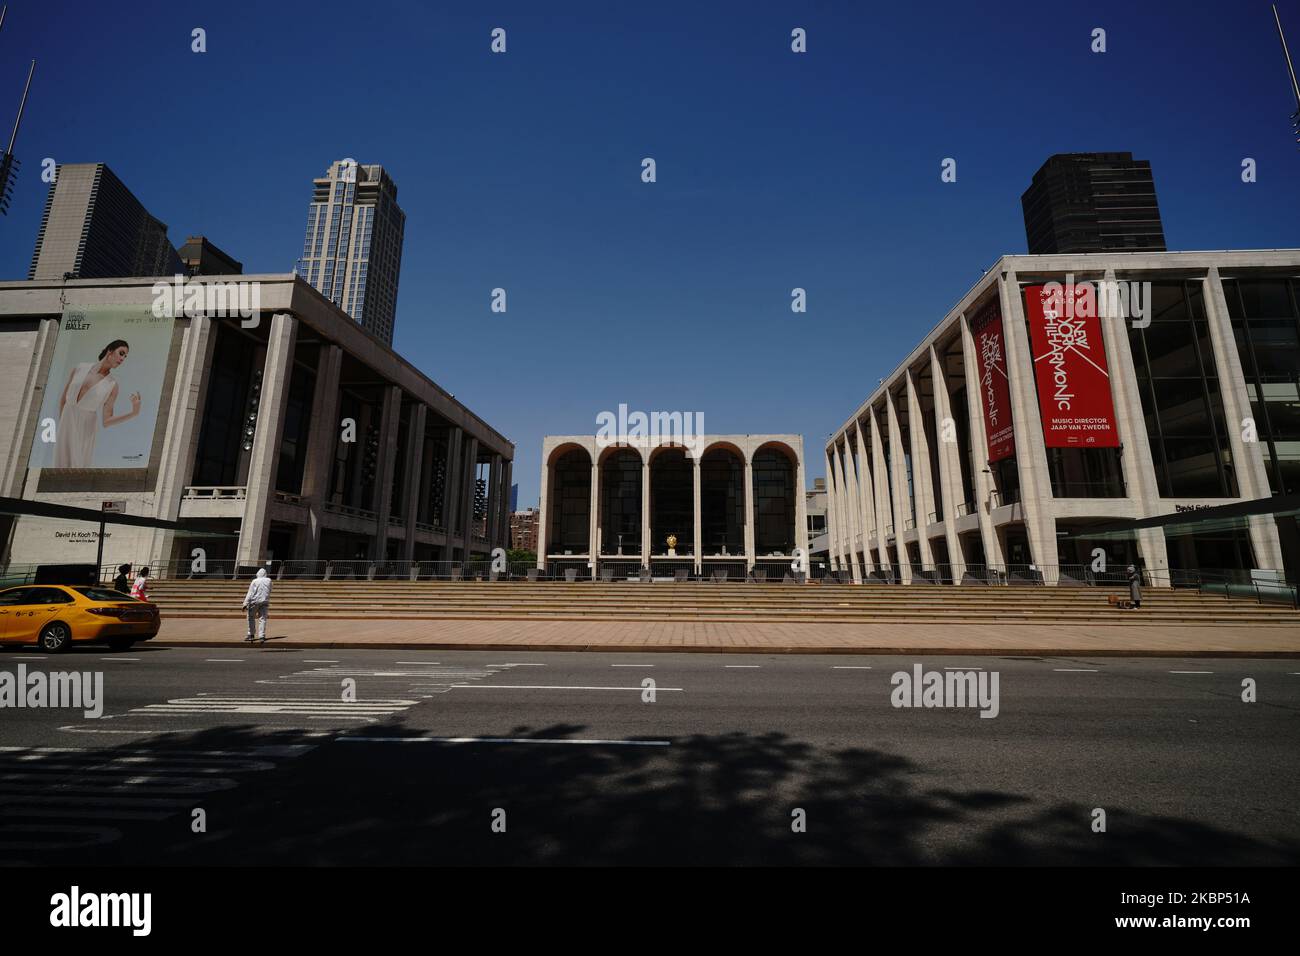 A view of a Lincoln Center during the coronavirus pandemic on May 20, 2020 in New York City. COVID-19 has spread to most countries around the world, claiming over 316,000 lives with over 4.8 million infections reported. (Photo by John Nacion/NurPhoto) Stock Photo